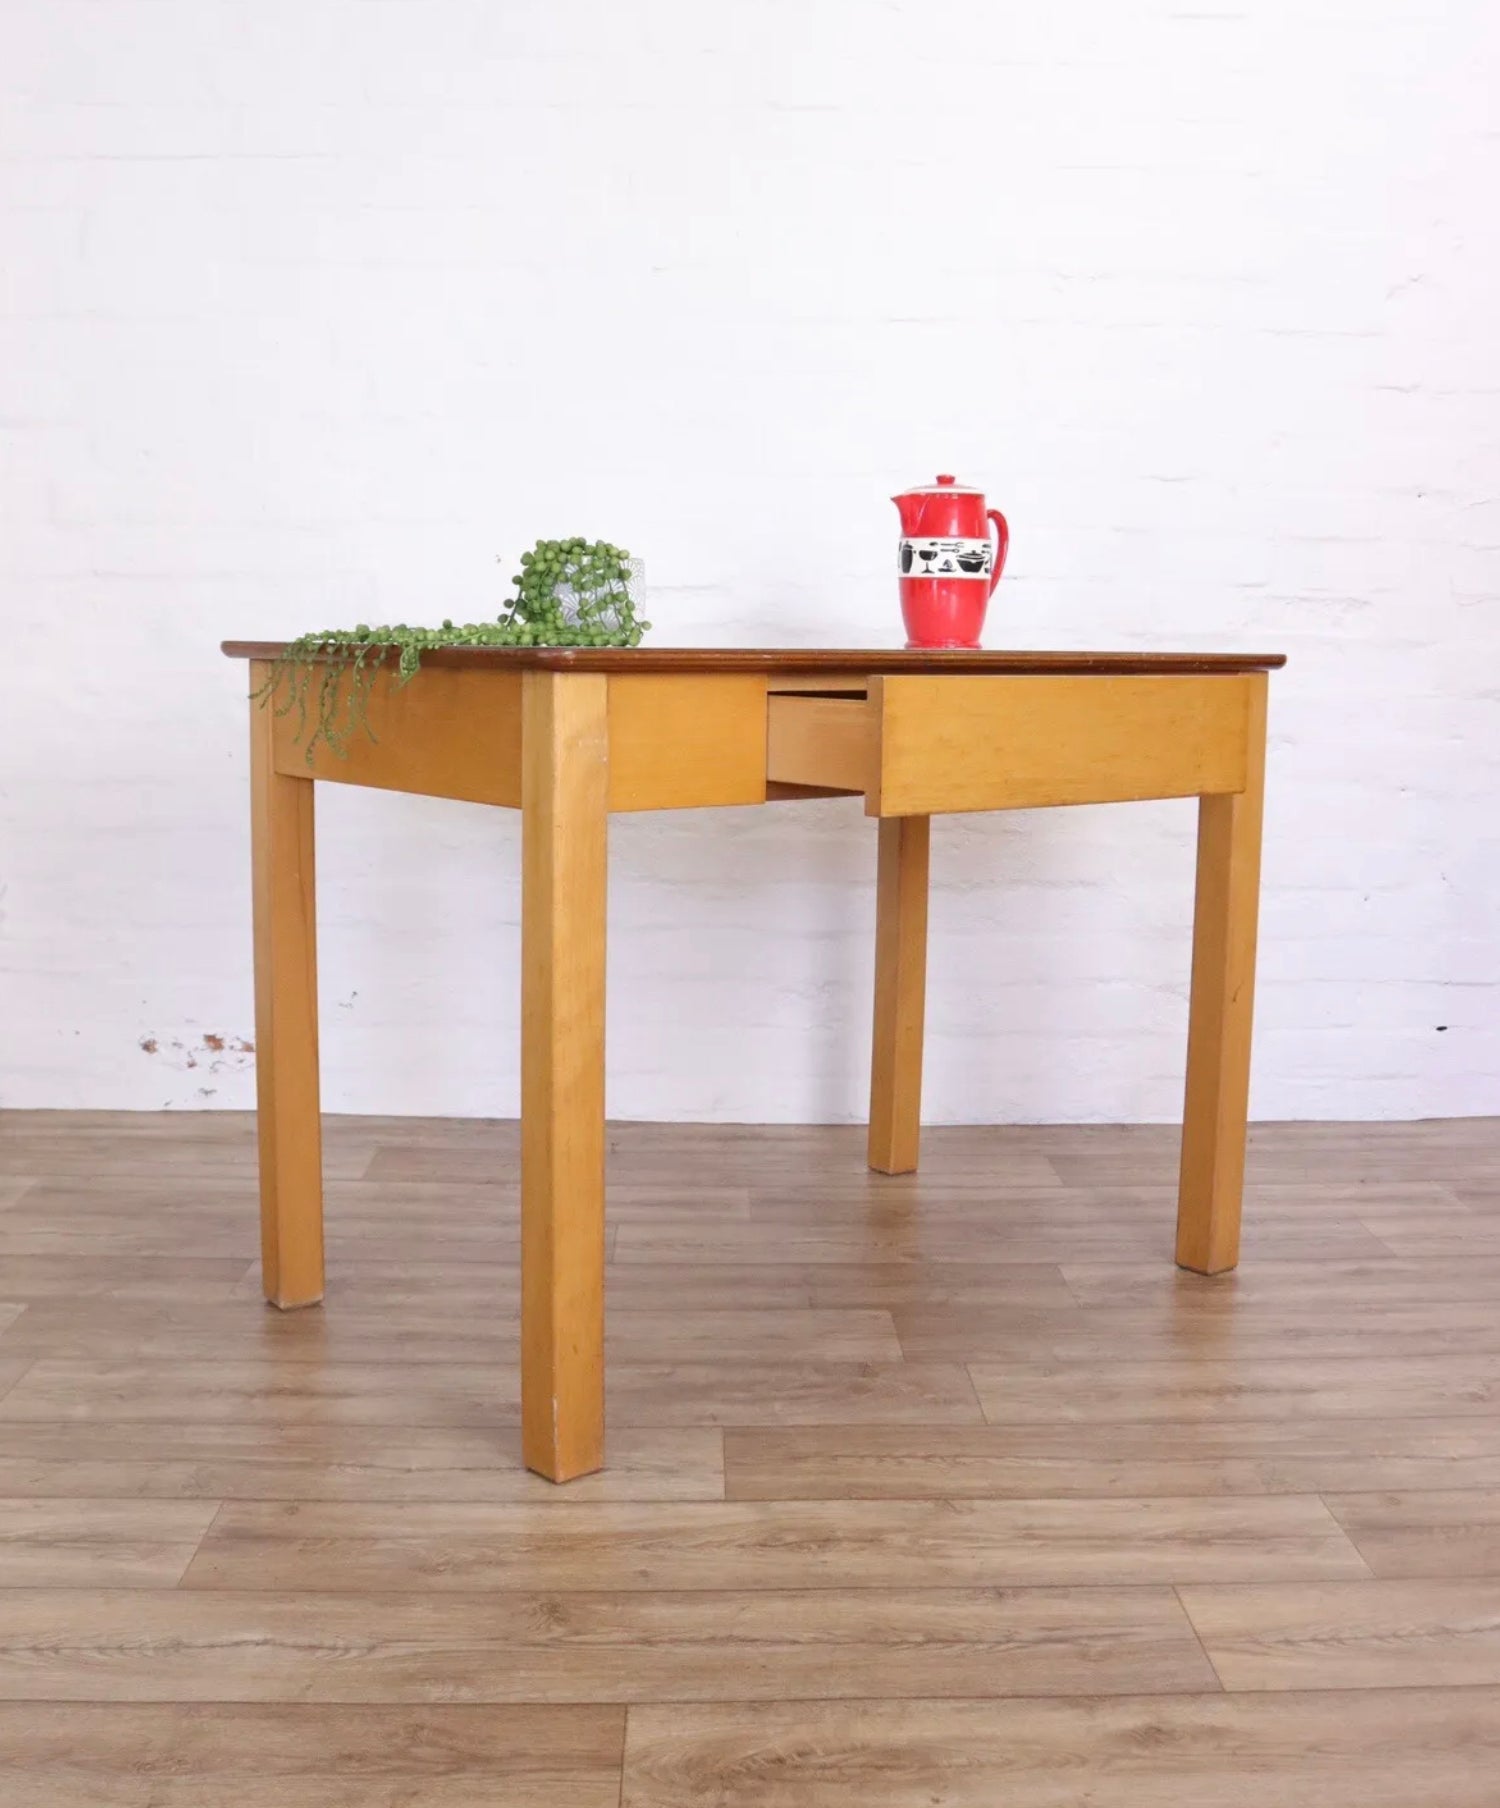 Mid Century Remploy Beech Desk/Table with Drawer Formica Top - teakyfinders